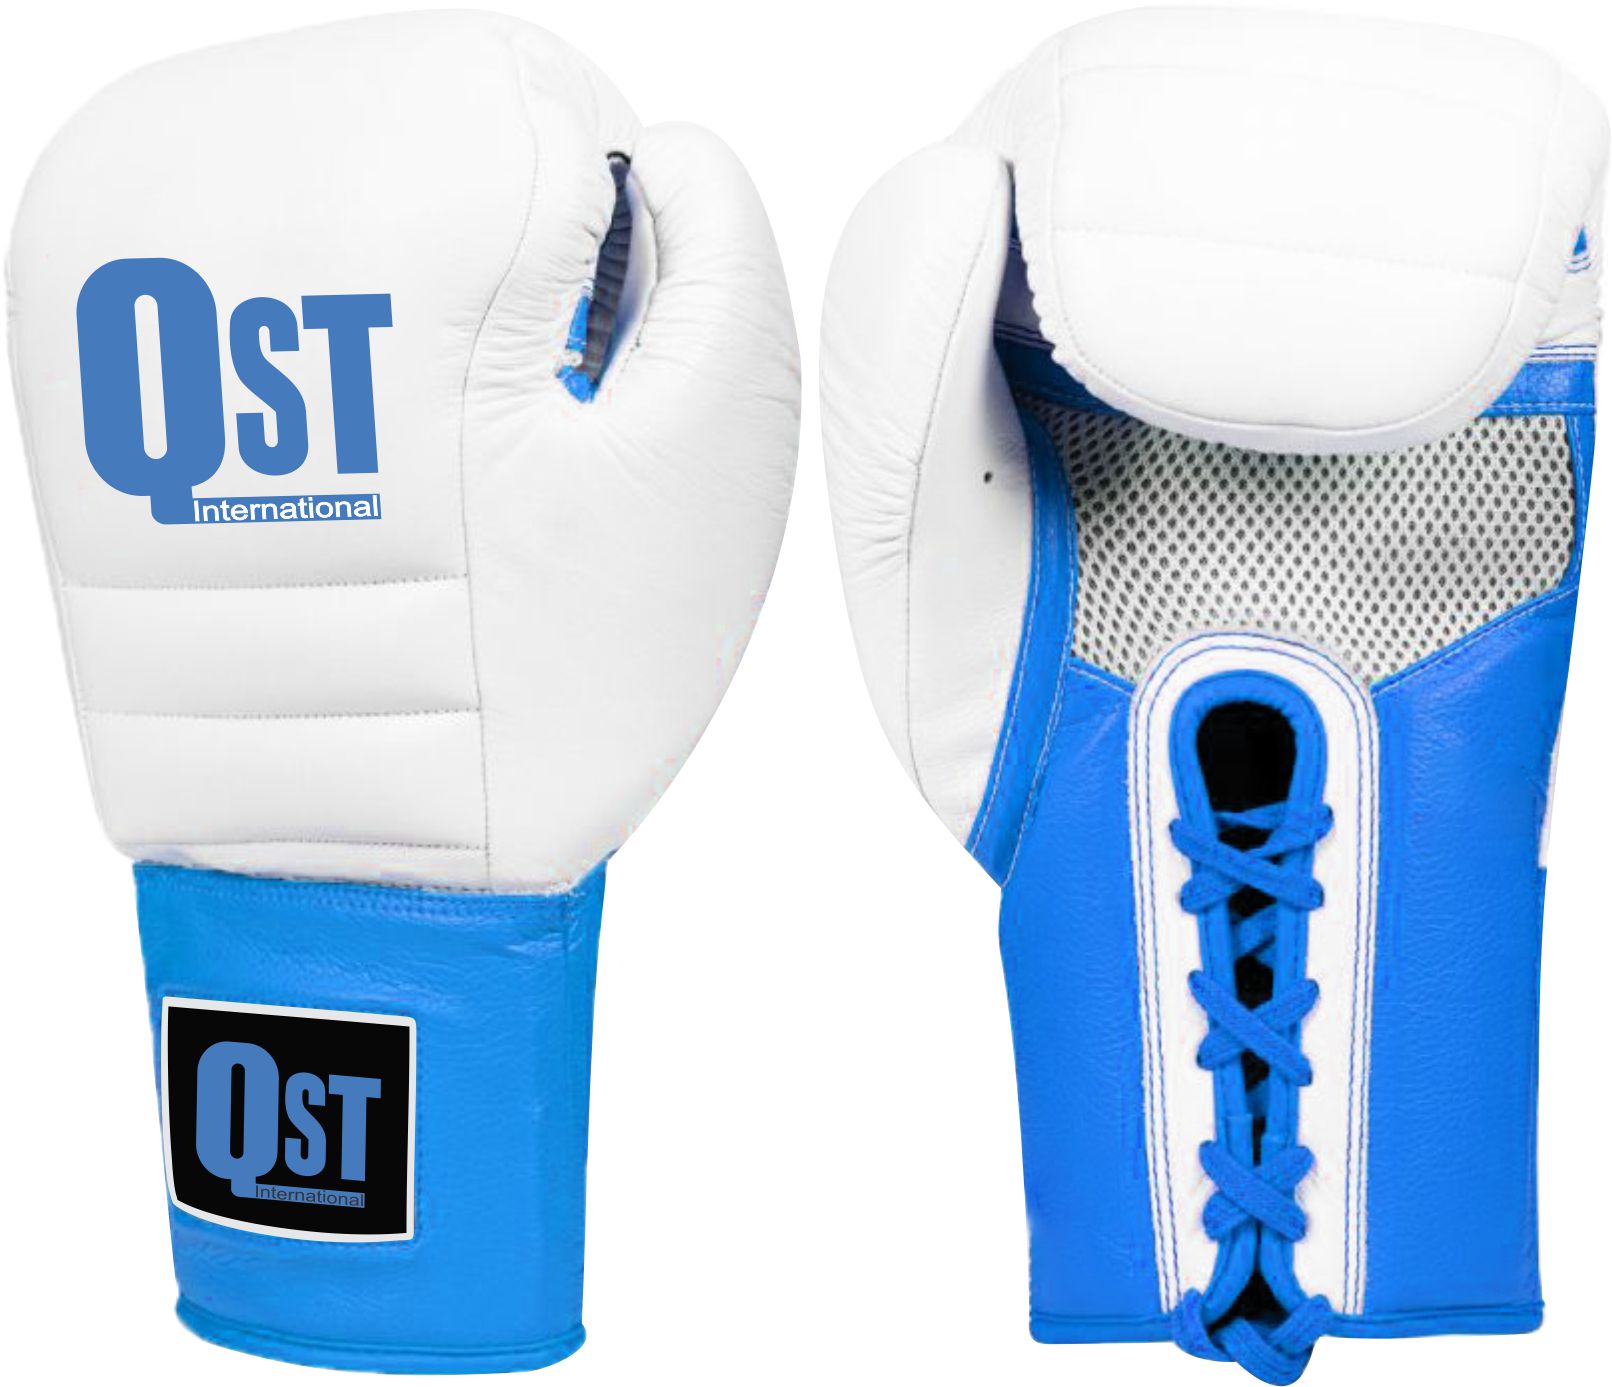 Lace up Boxing Gloves